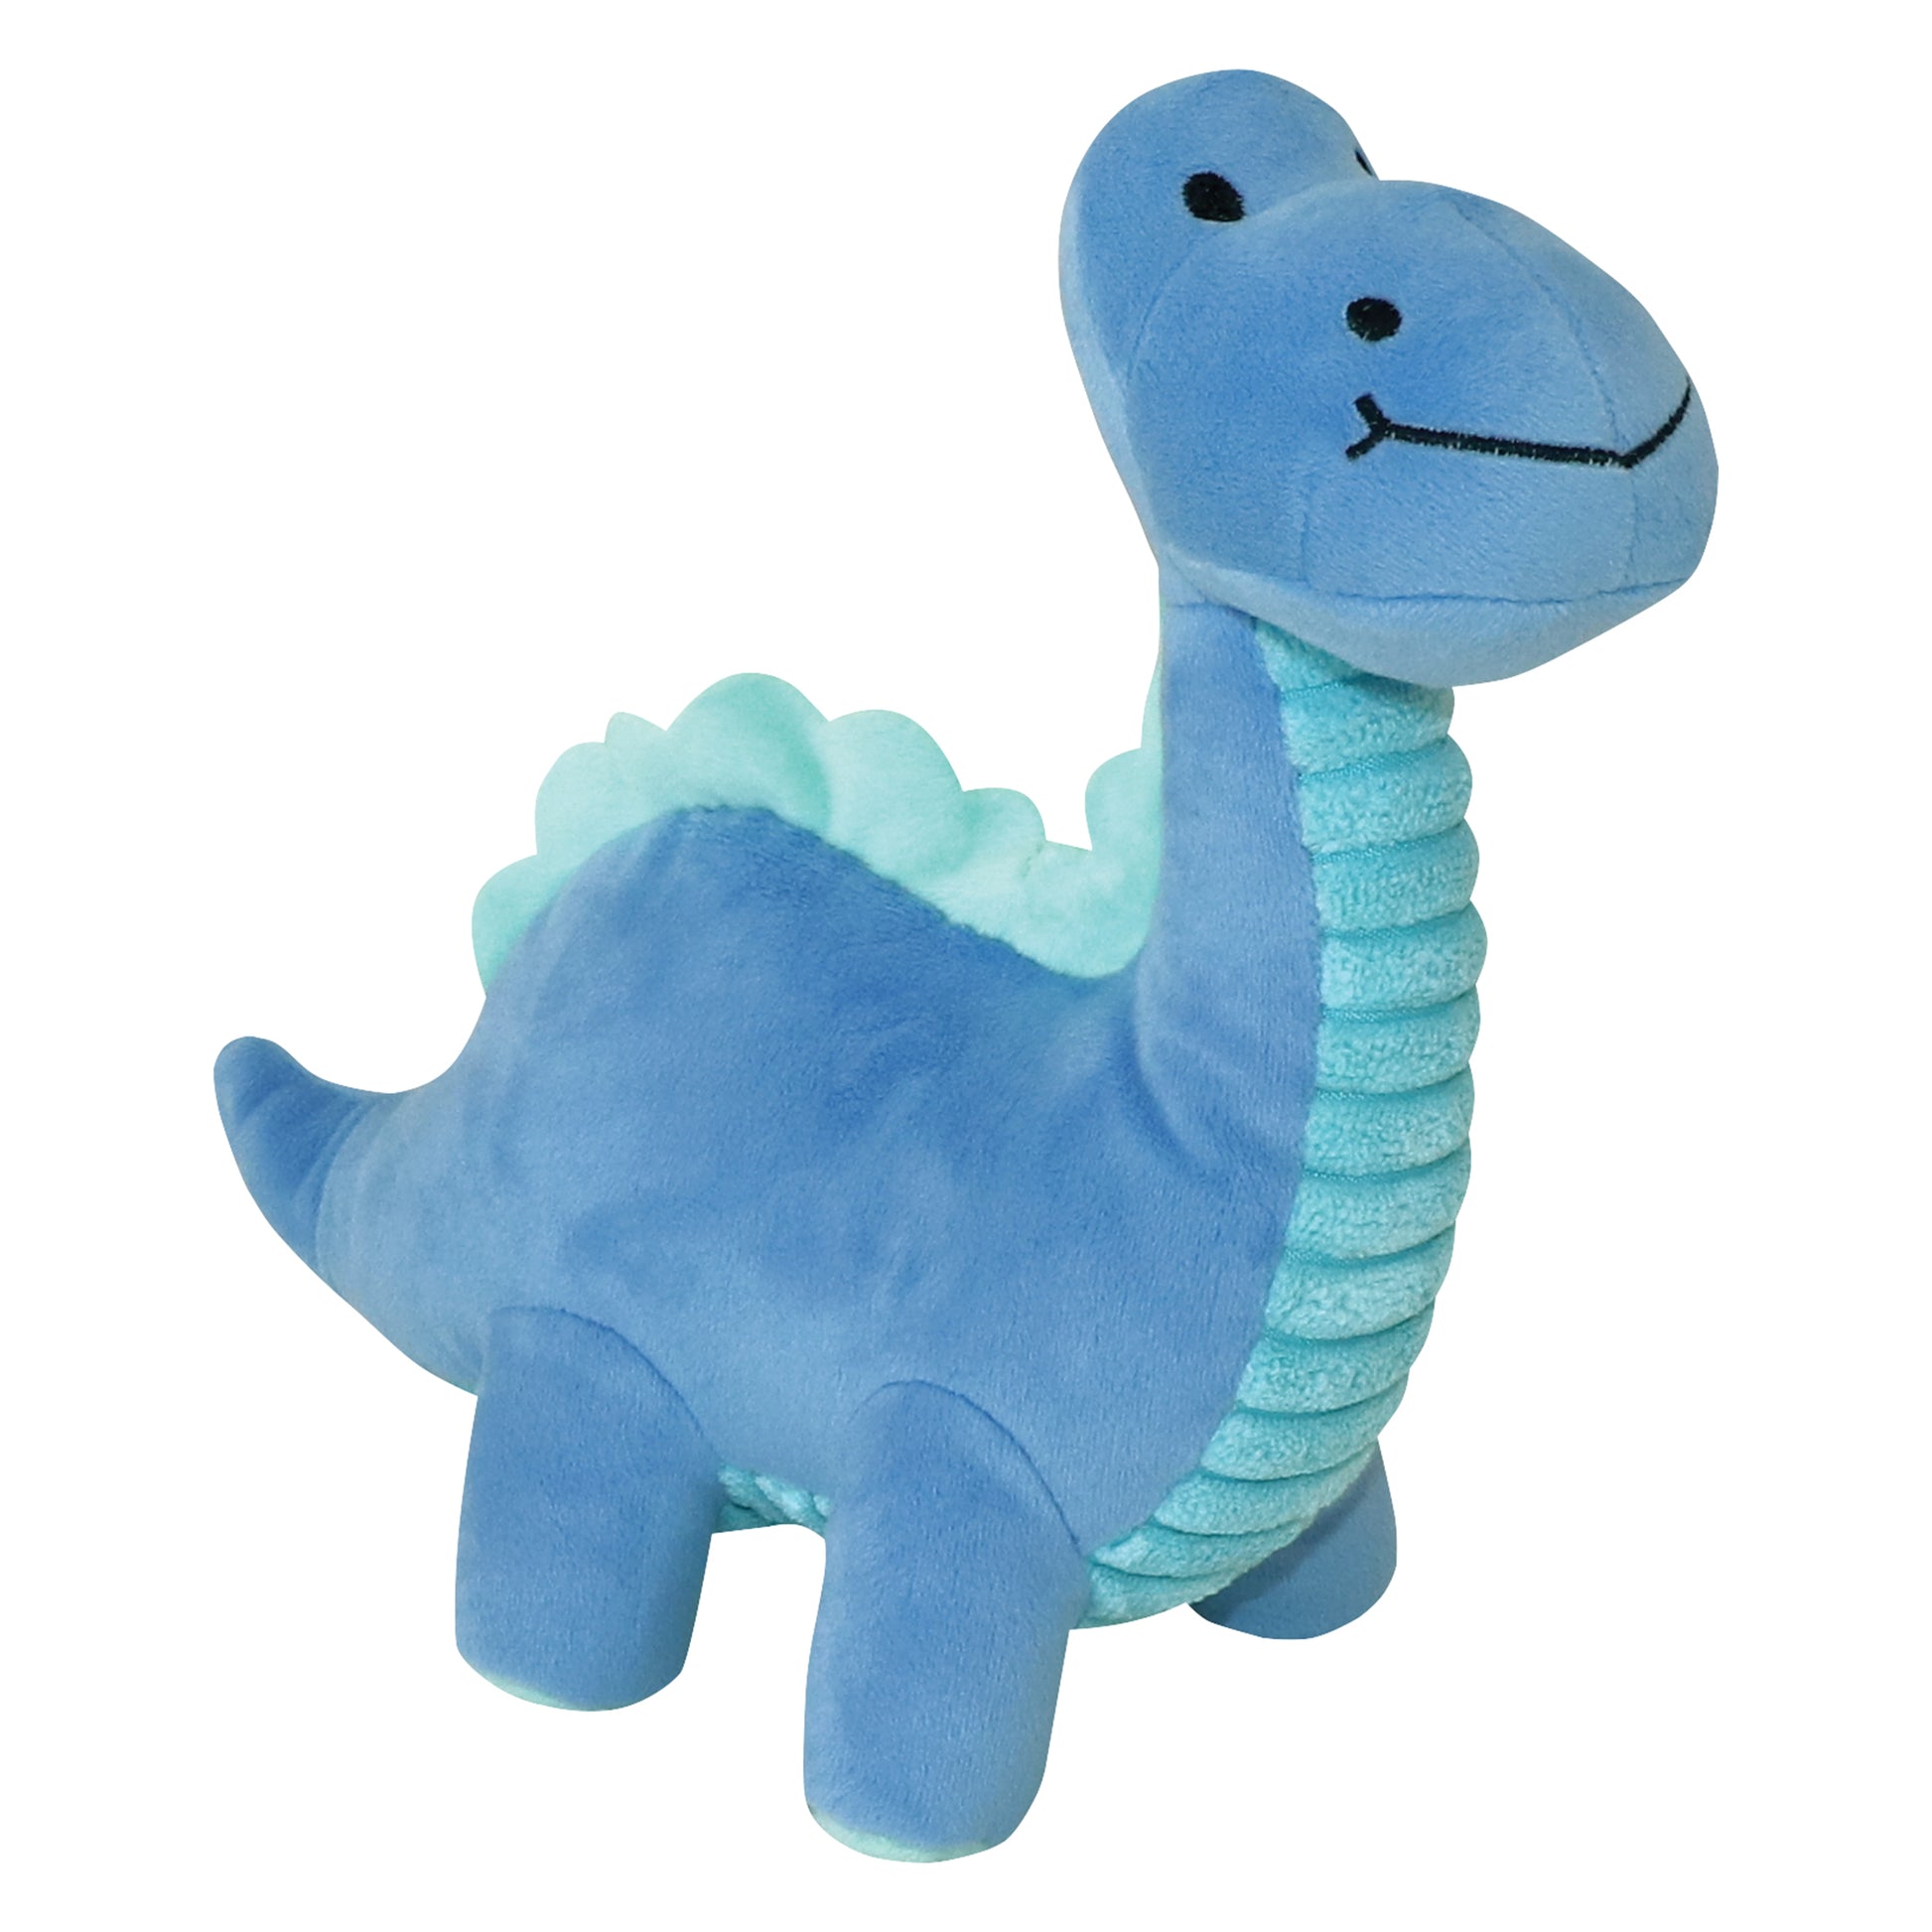  Dinosaur 9in Plush Toy Blue - angled view